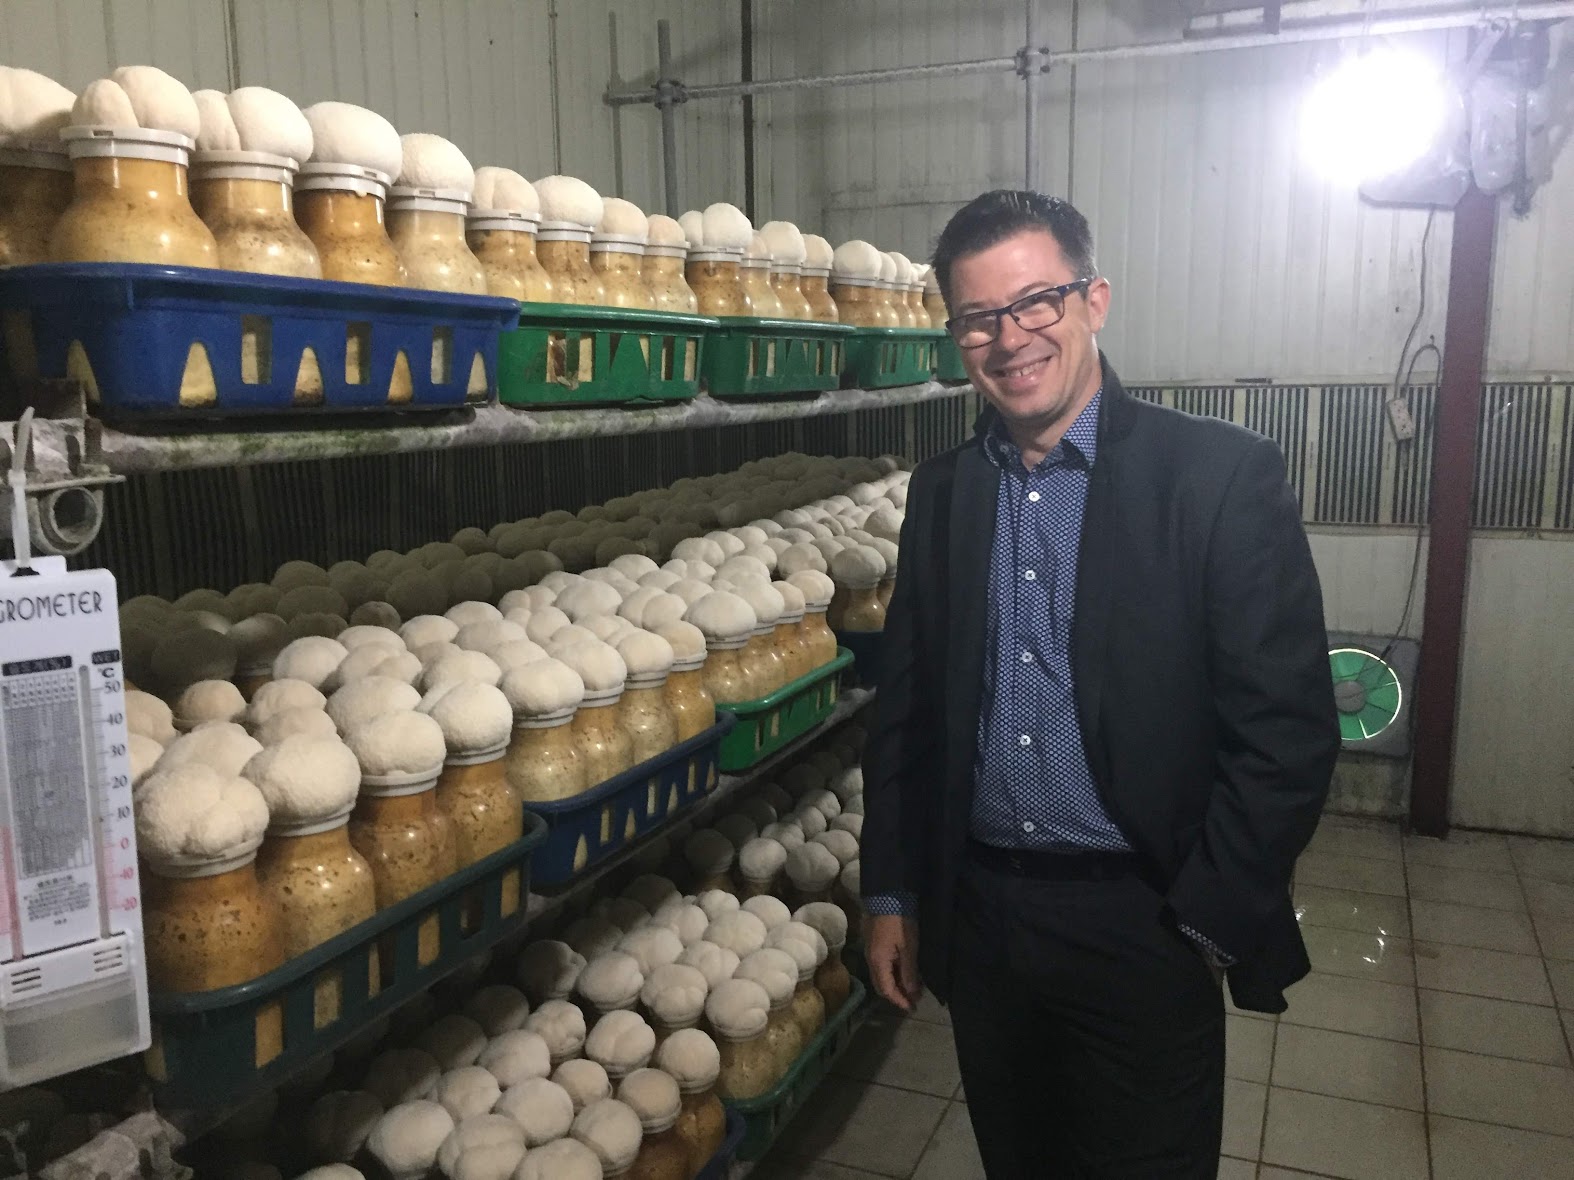 QBI's Professor Fred Meunier with the Lion's mane mushrooms that are improving neurite outgrowth.